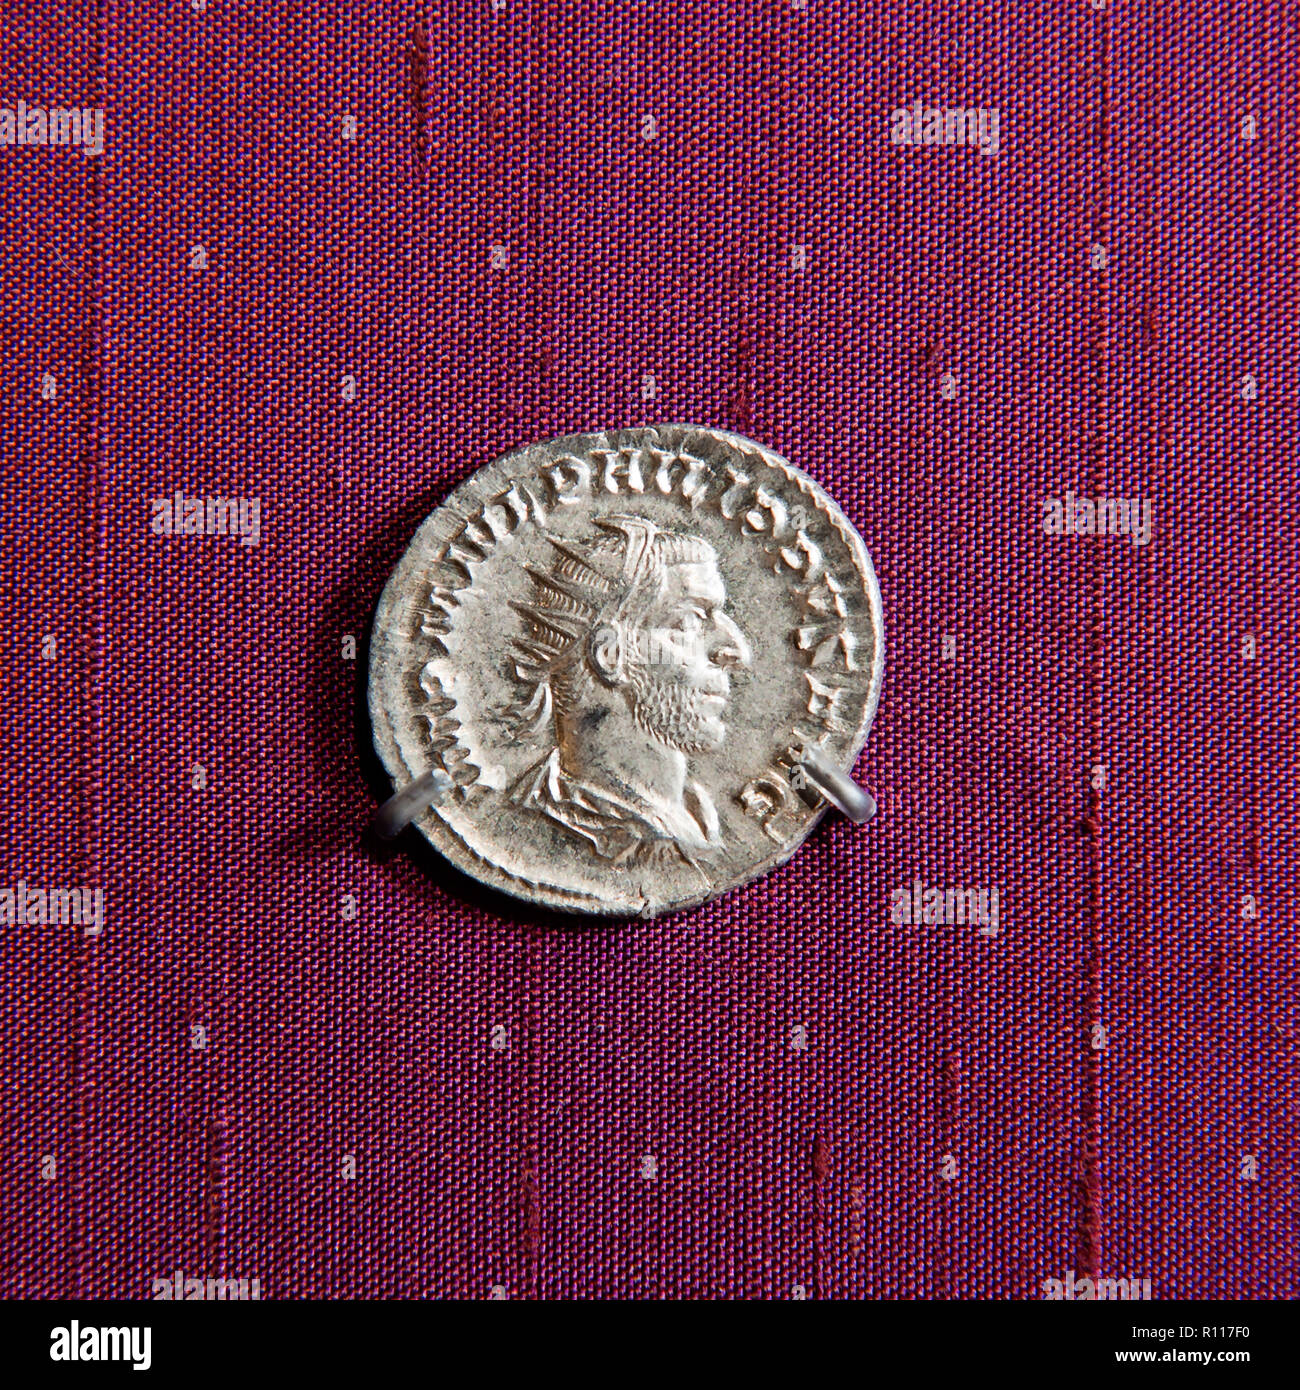 Man's profile on ancient coin Stock Photo